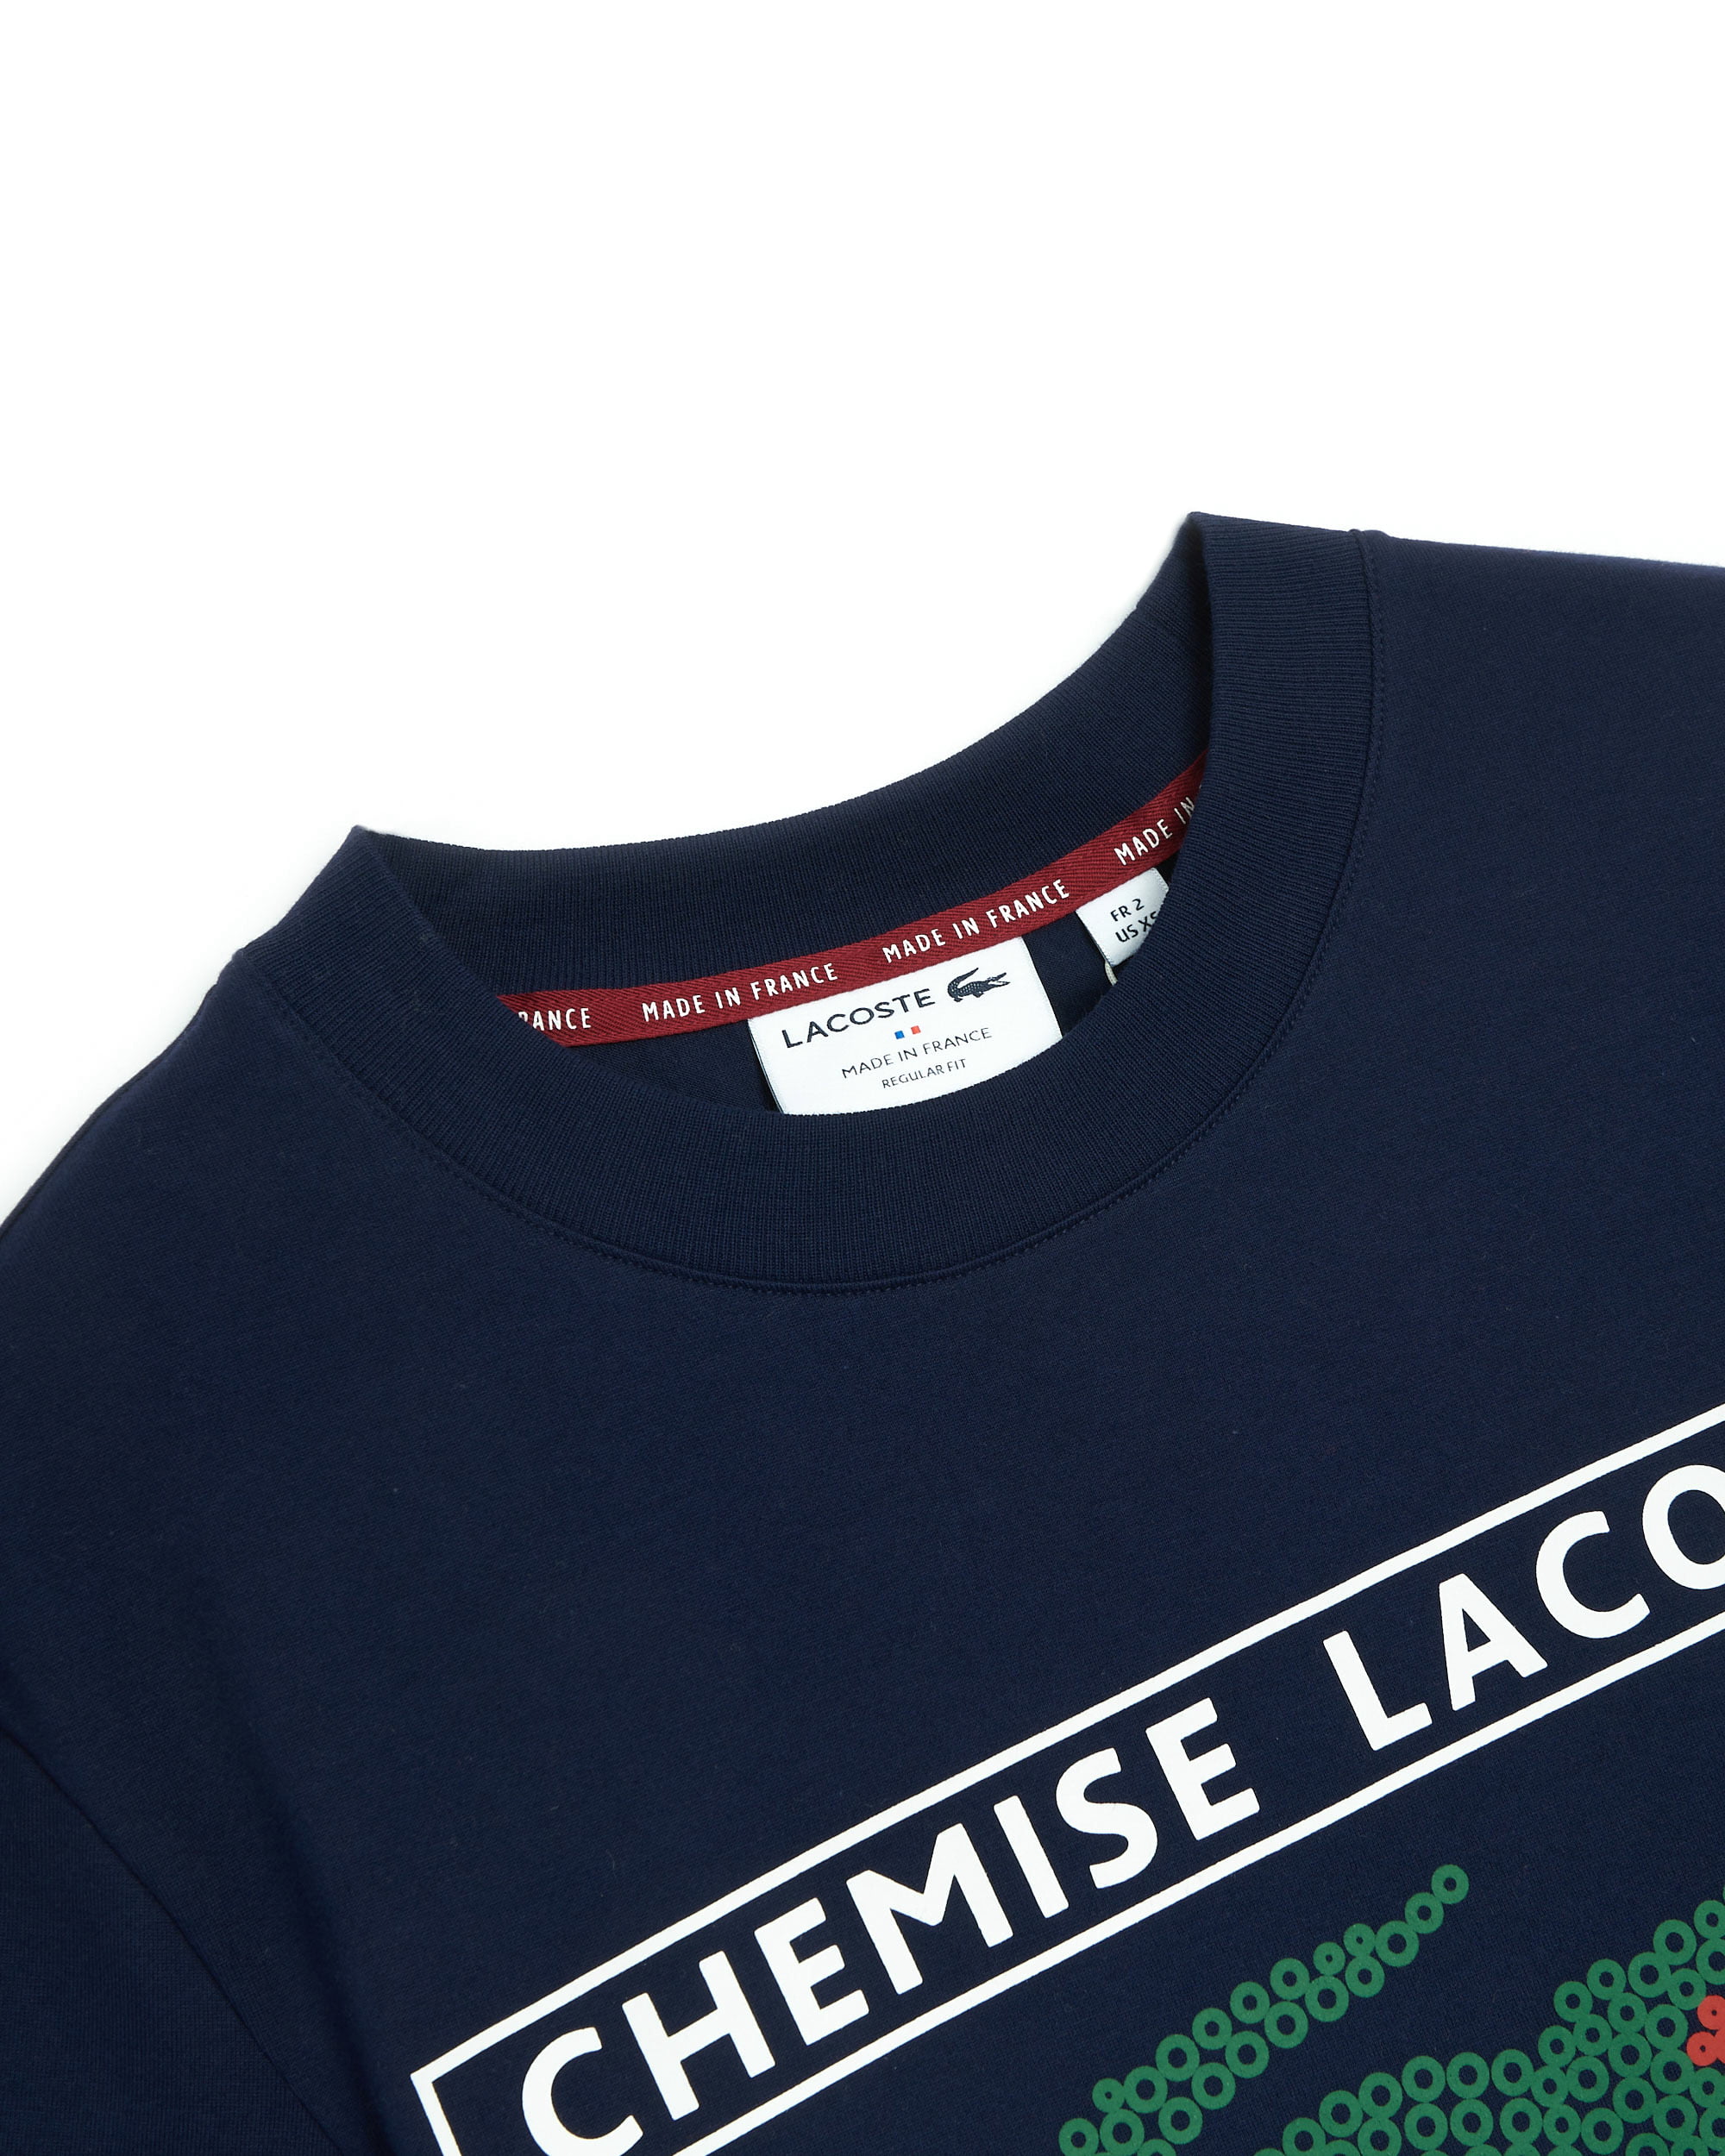 3/S In Navy Men\'s - T-Shirt Lacoste France Made